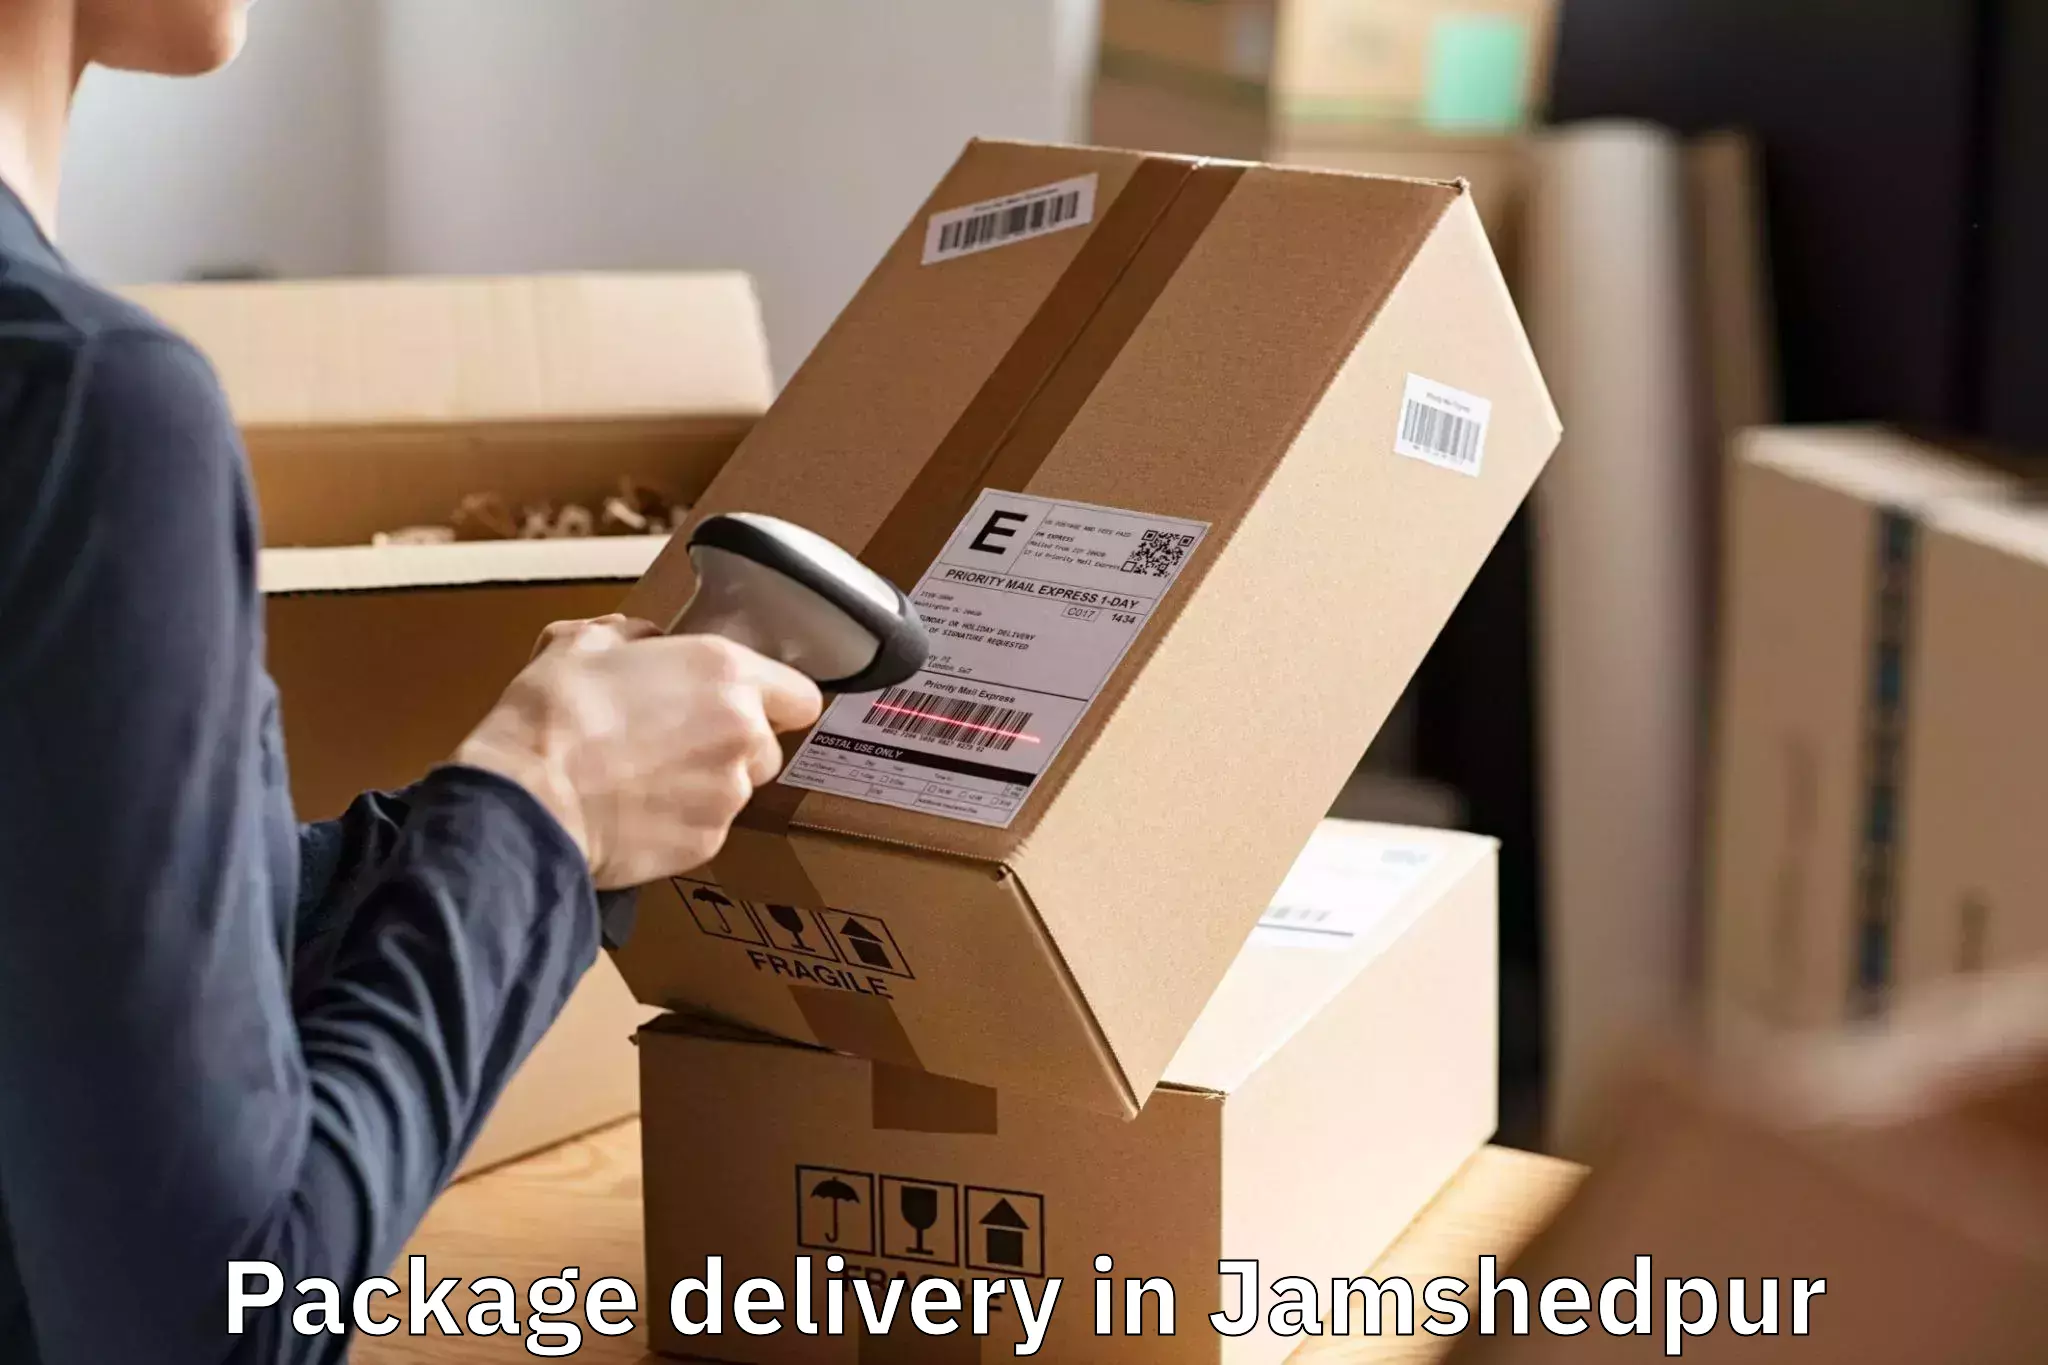 Trusted Package Delivery in Jamshedpur, Jharkhand (JH)